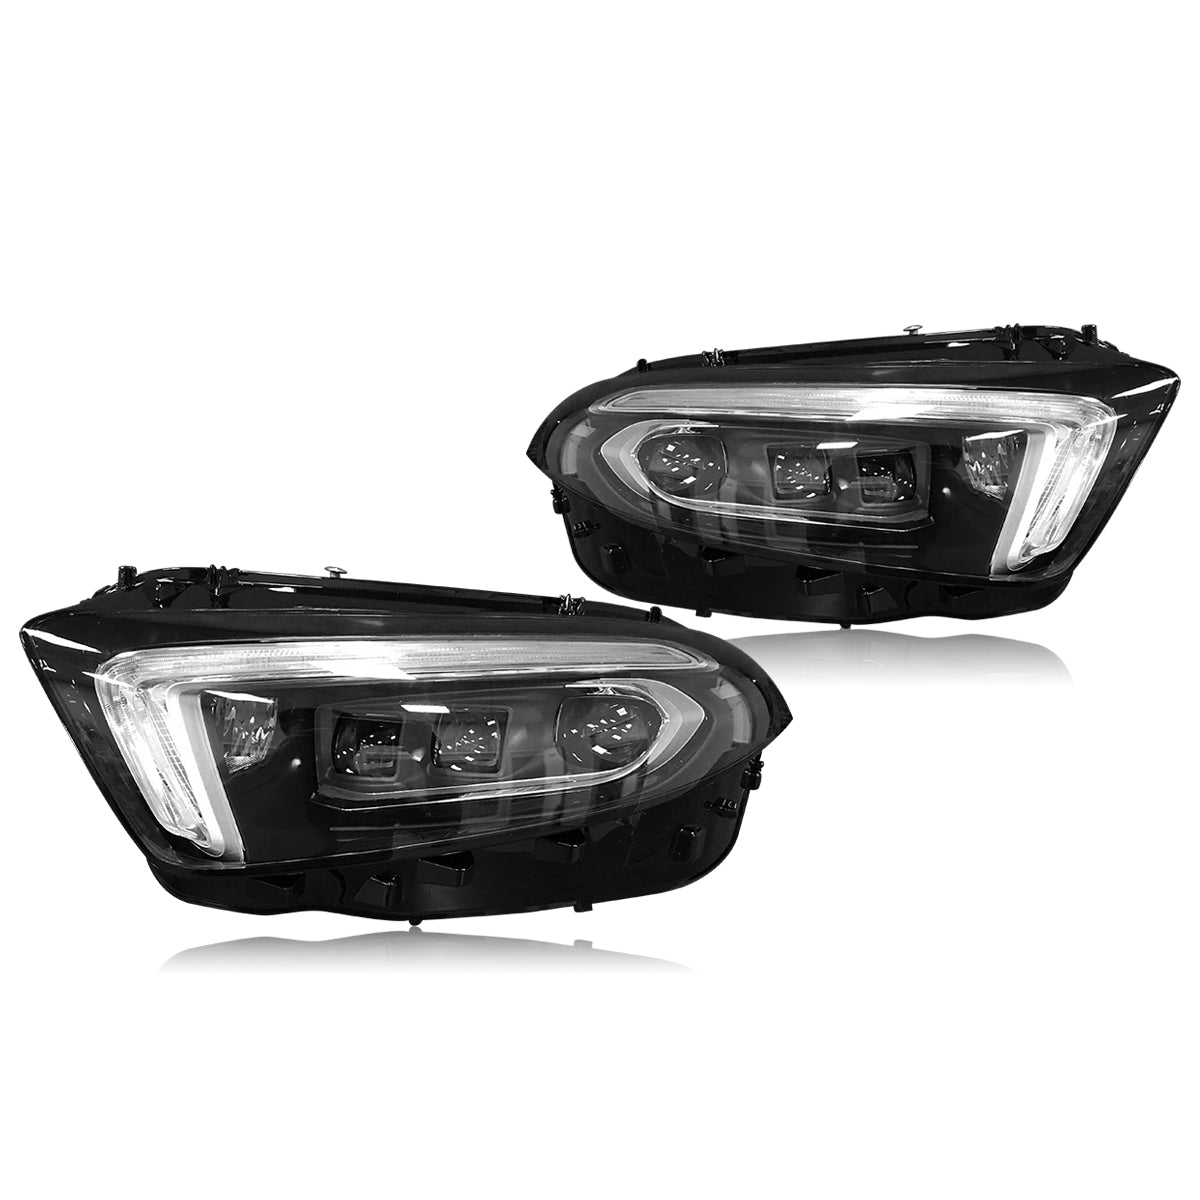 The headlight for W177 A-class 2019 low-profile upgrade to high-profile